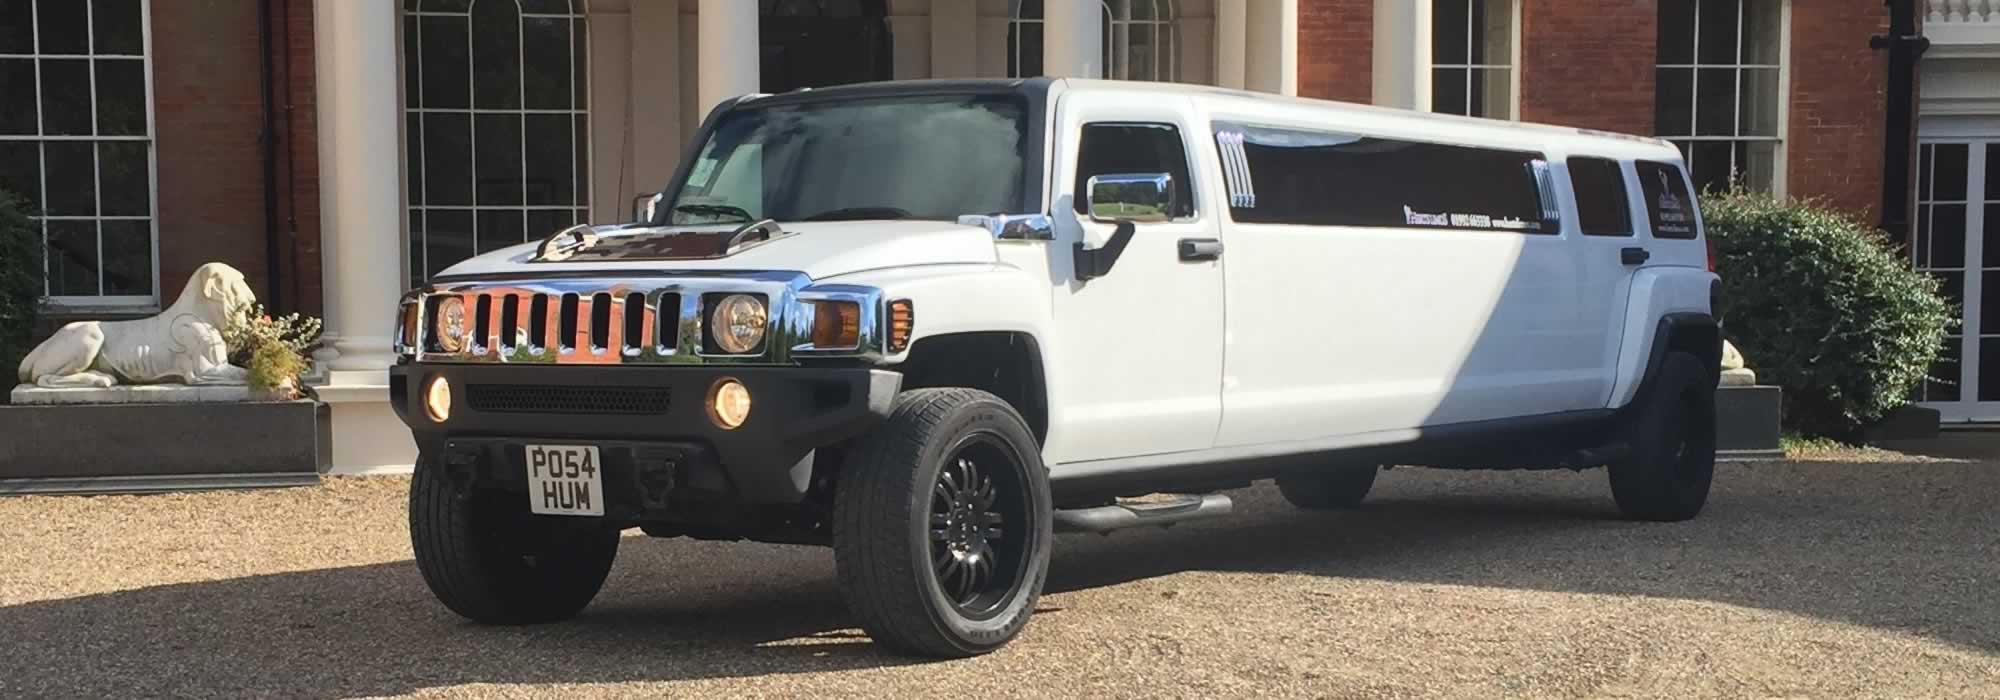 hummer-h3-limo-hire